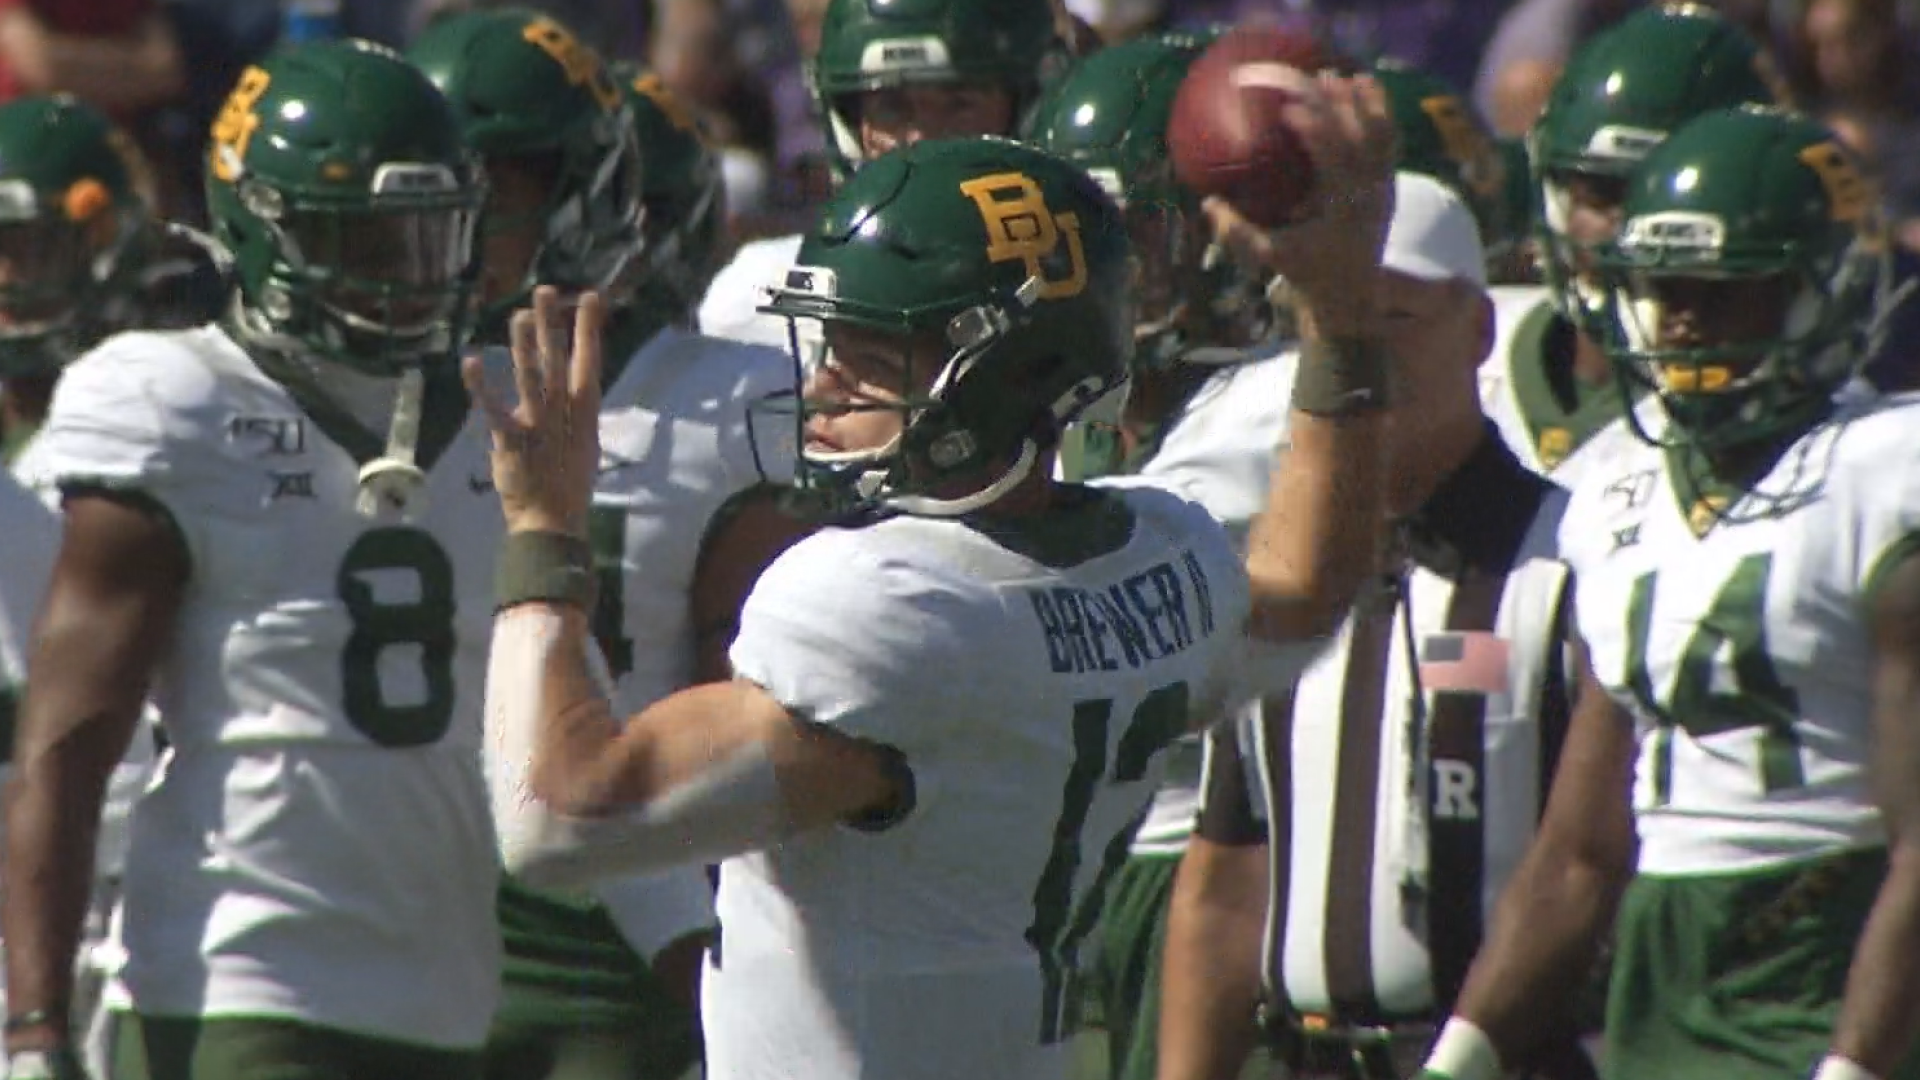 Just one year after College Gameday visited Waco, the Bears are looking to snap a five-game losing streak.